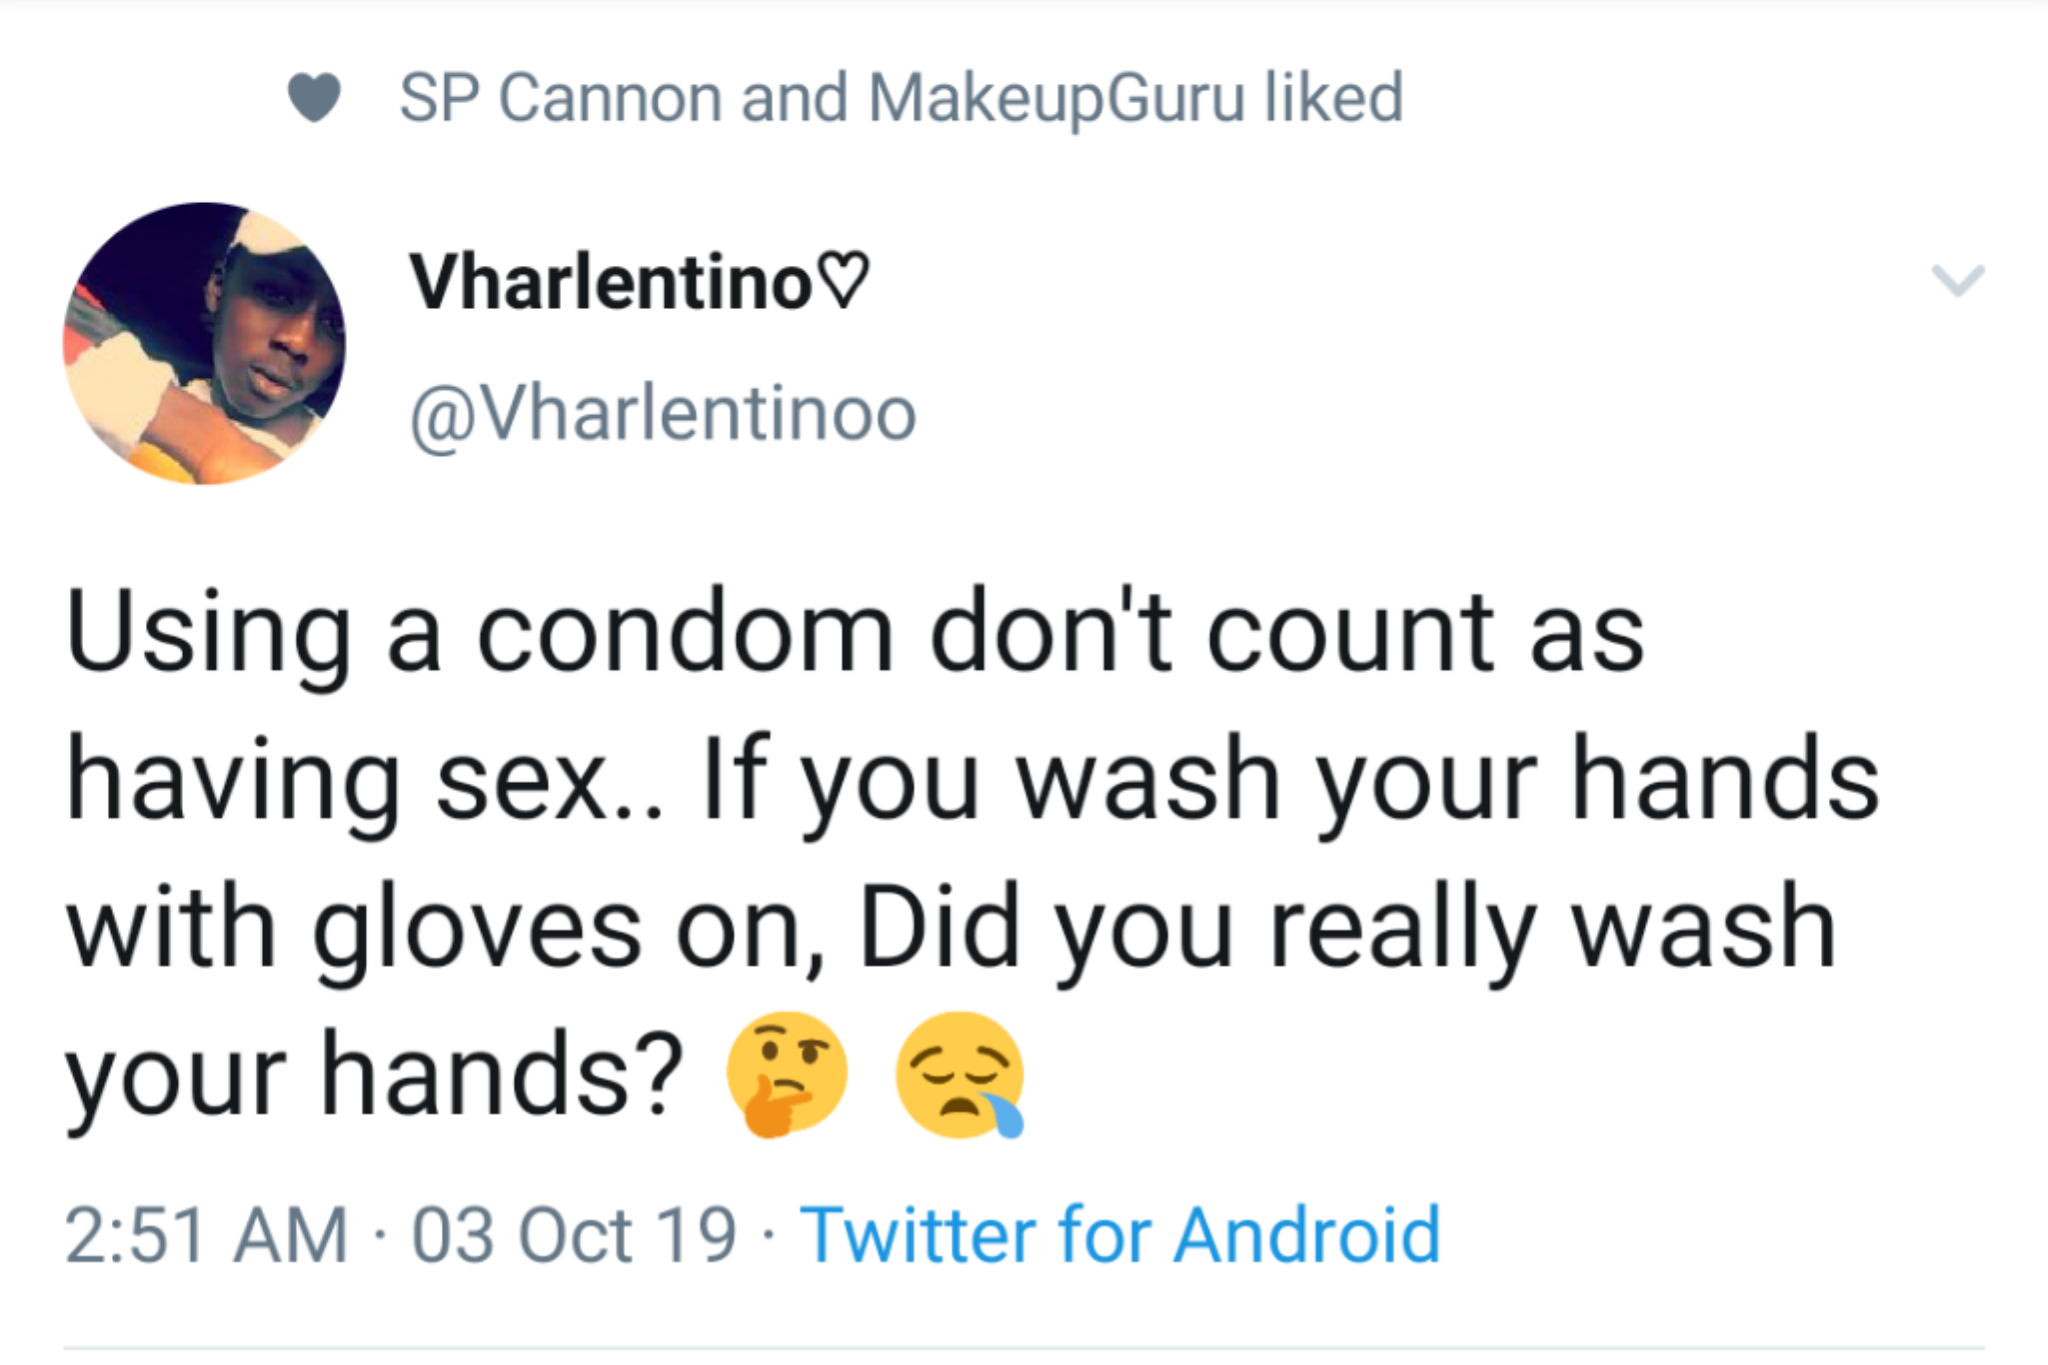 black twitter - Cannon and Makeup Guru d Vharlentino V Using a condom don't count as having sex.. If you wash your hands with gloves on, Did you really wash your hands? 03 Oct 19. Twitter for Android